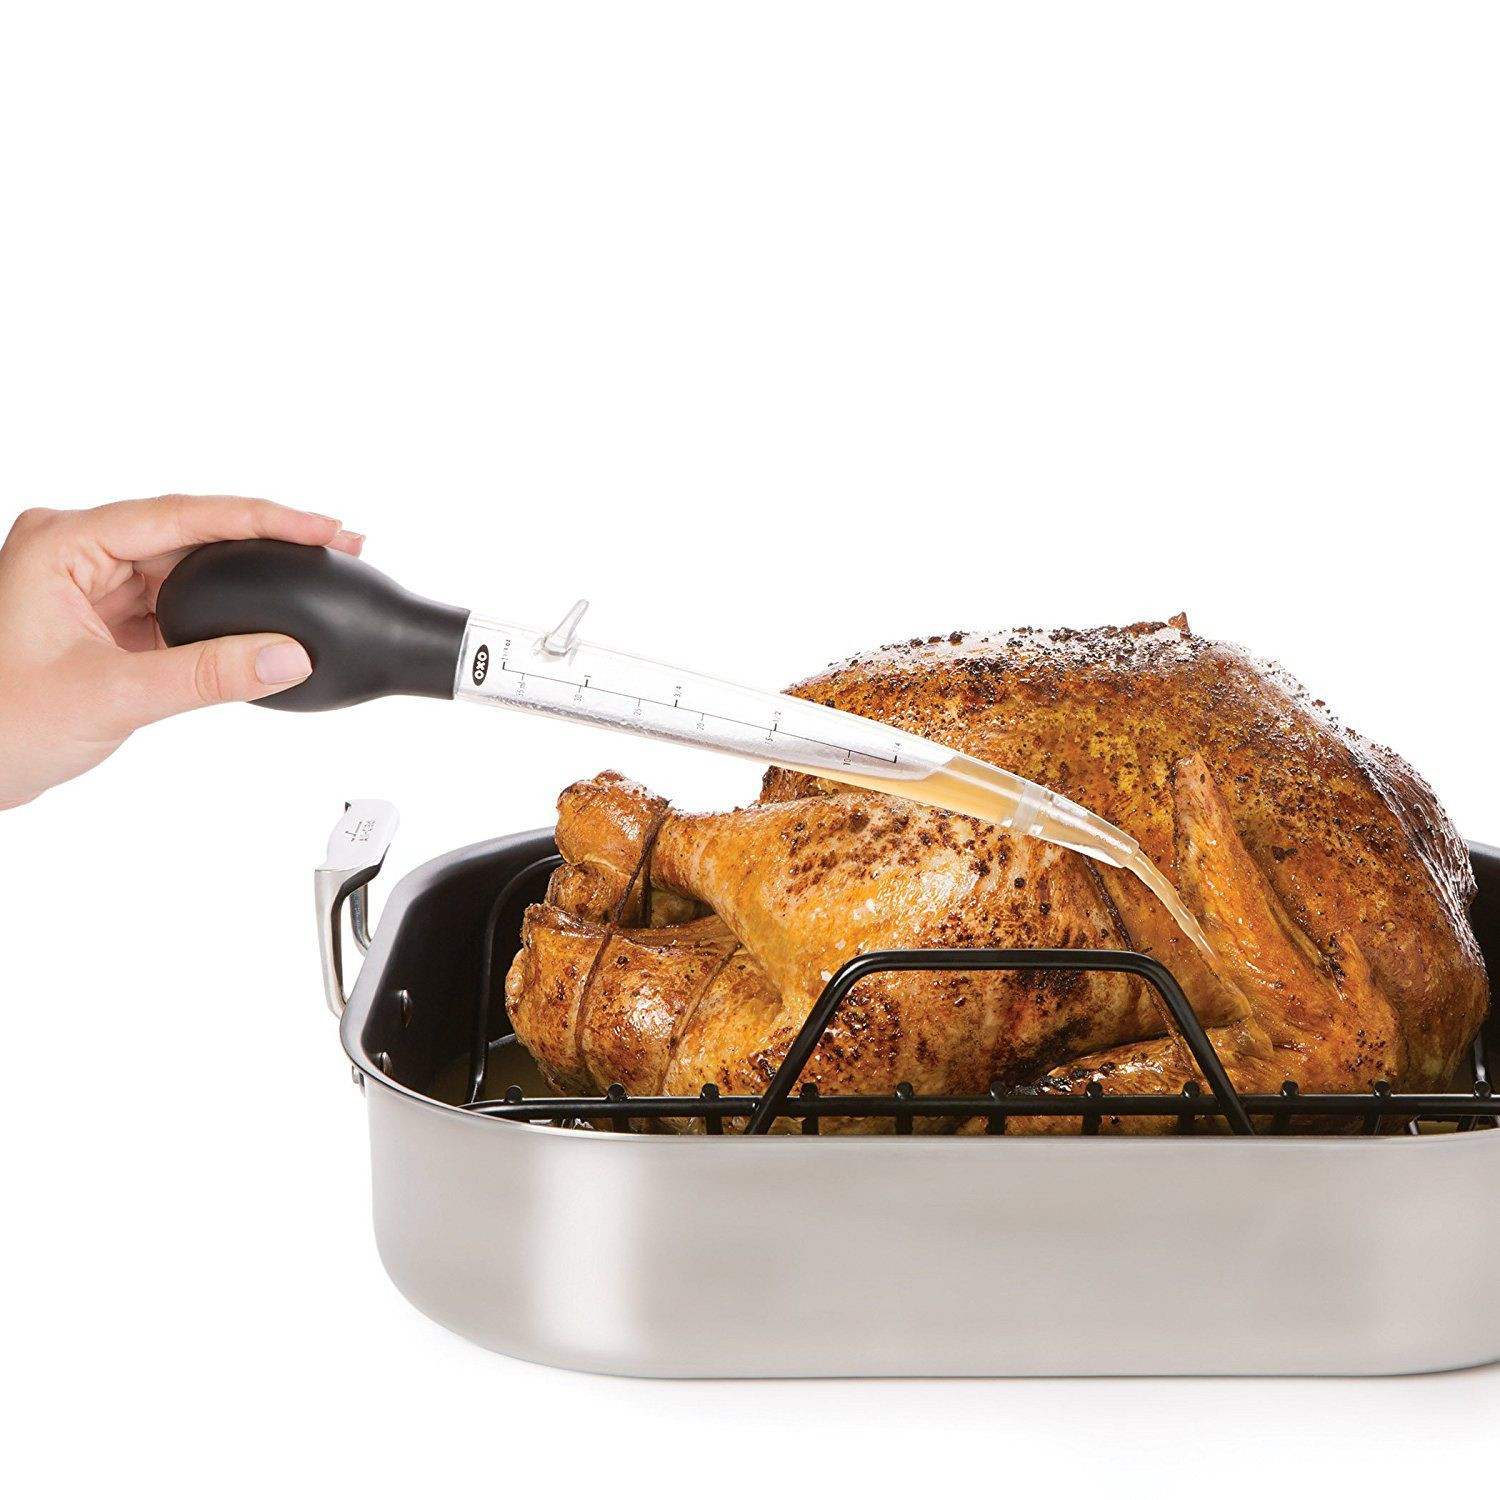 Best Turkey To Buy For Thanksgiving
 The 7 Best Turkey Basters to Buy for 2018